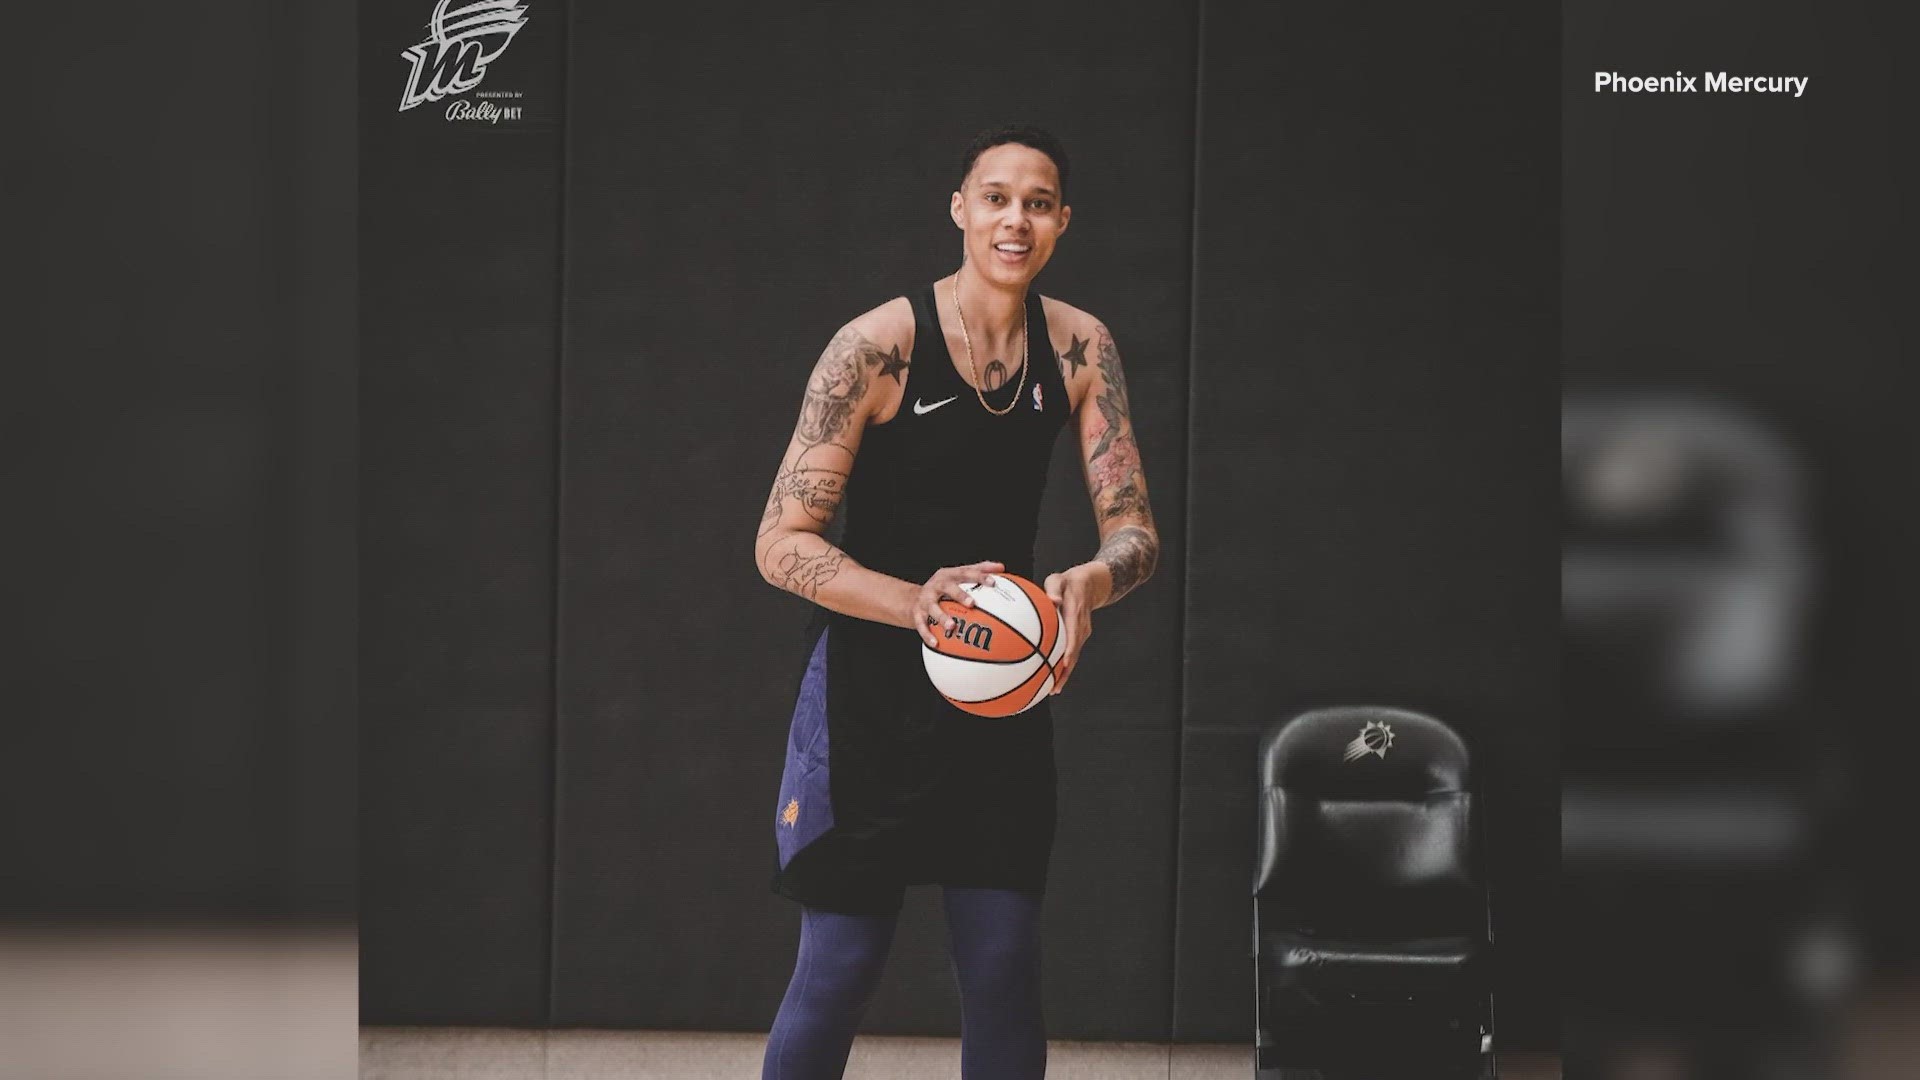 The WNBA star, along with her team, the Phoenix Mercury, are preparing to take on the Dallas Wings both Wednesday, June 7 and Friday, June 9.